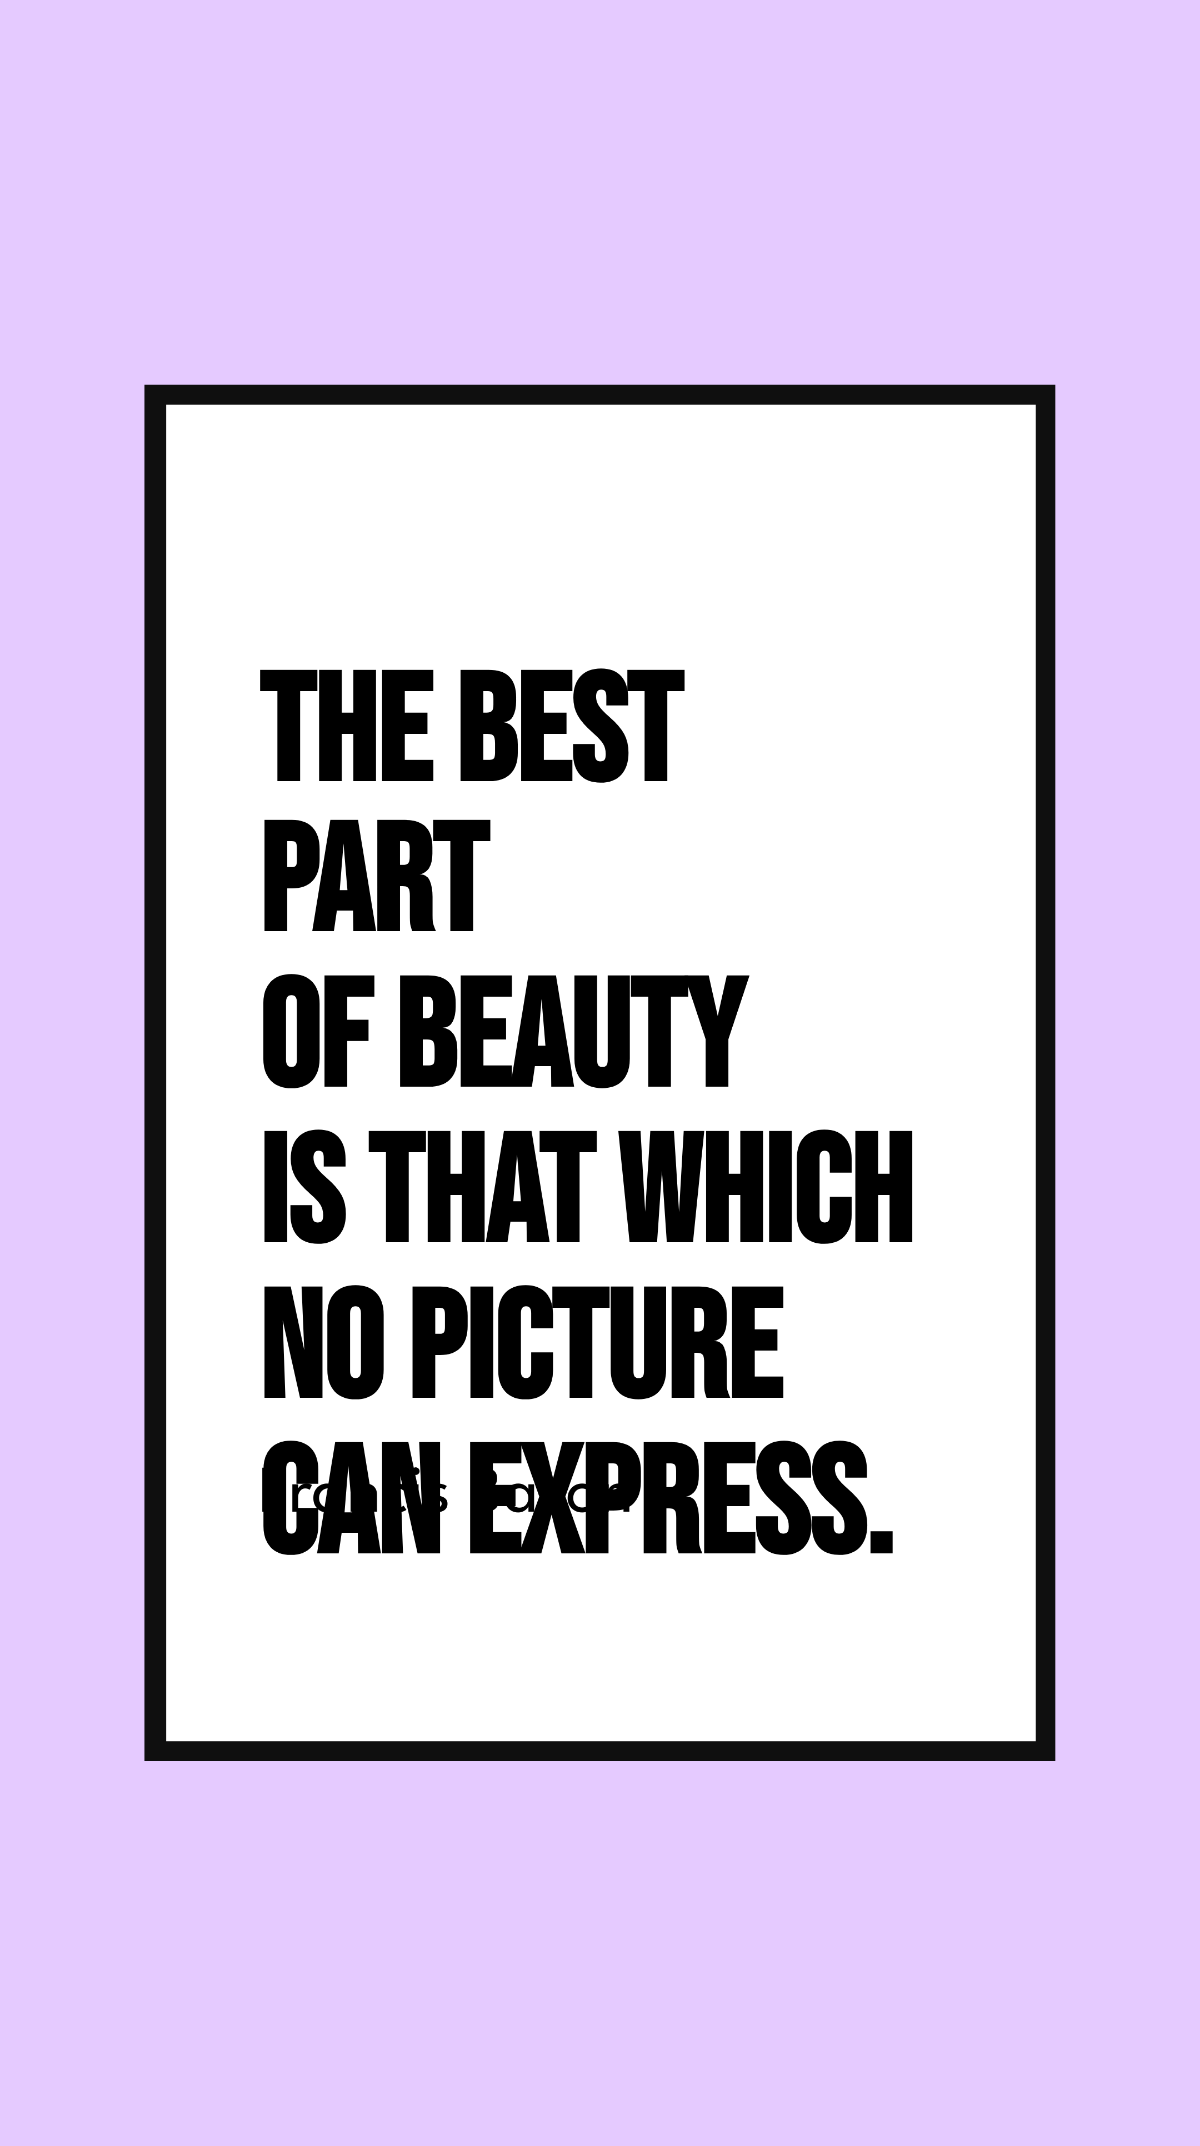 Free Francis Bacon - The best part of beauty is that which no picture can express. Template